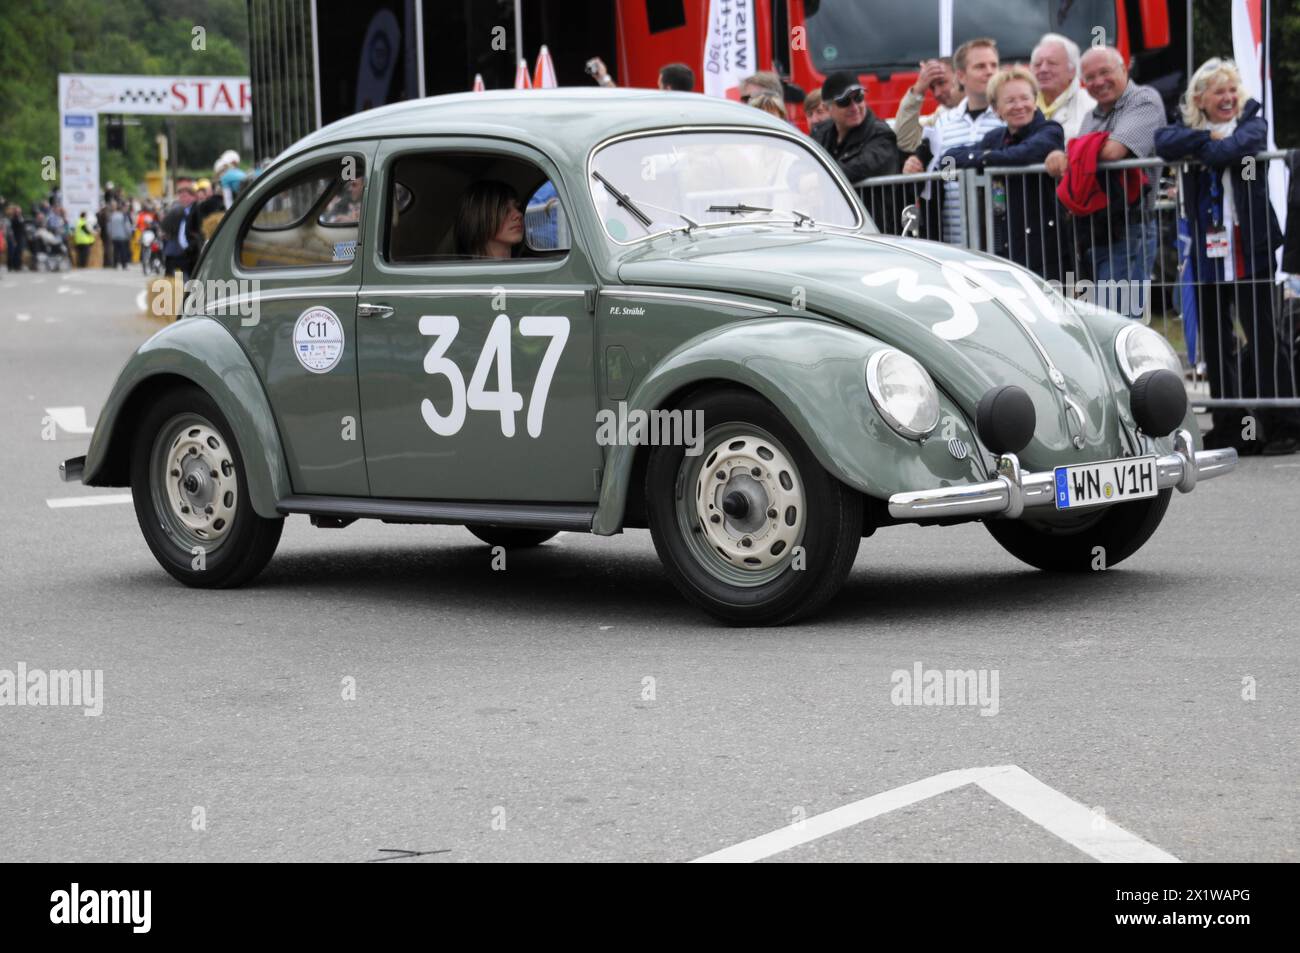 A green Volkswagen Beetle classic car with racing number on the road, SOLITUDE REVIVAL 2011, Stuttgart, Baden-Wuerttemberg, Germany Stock Photo